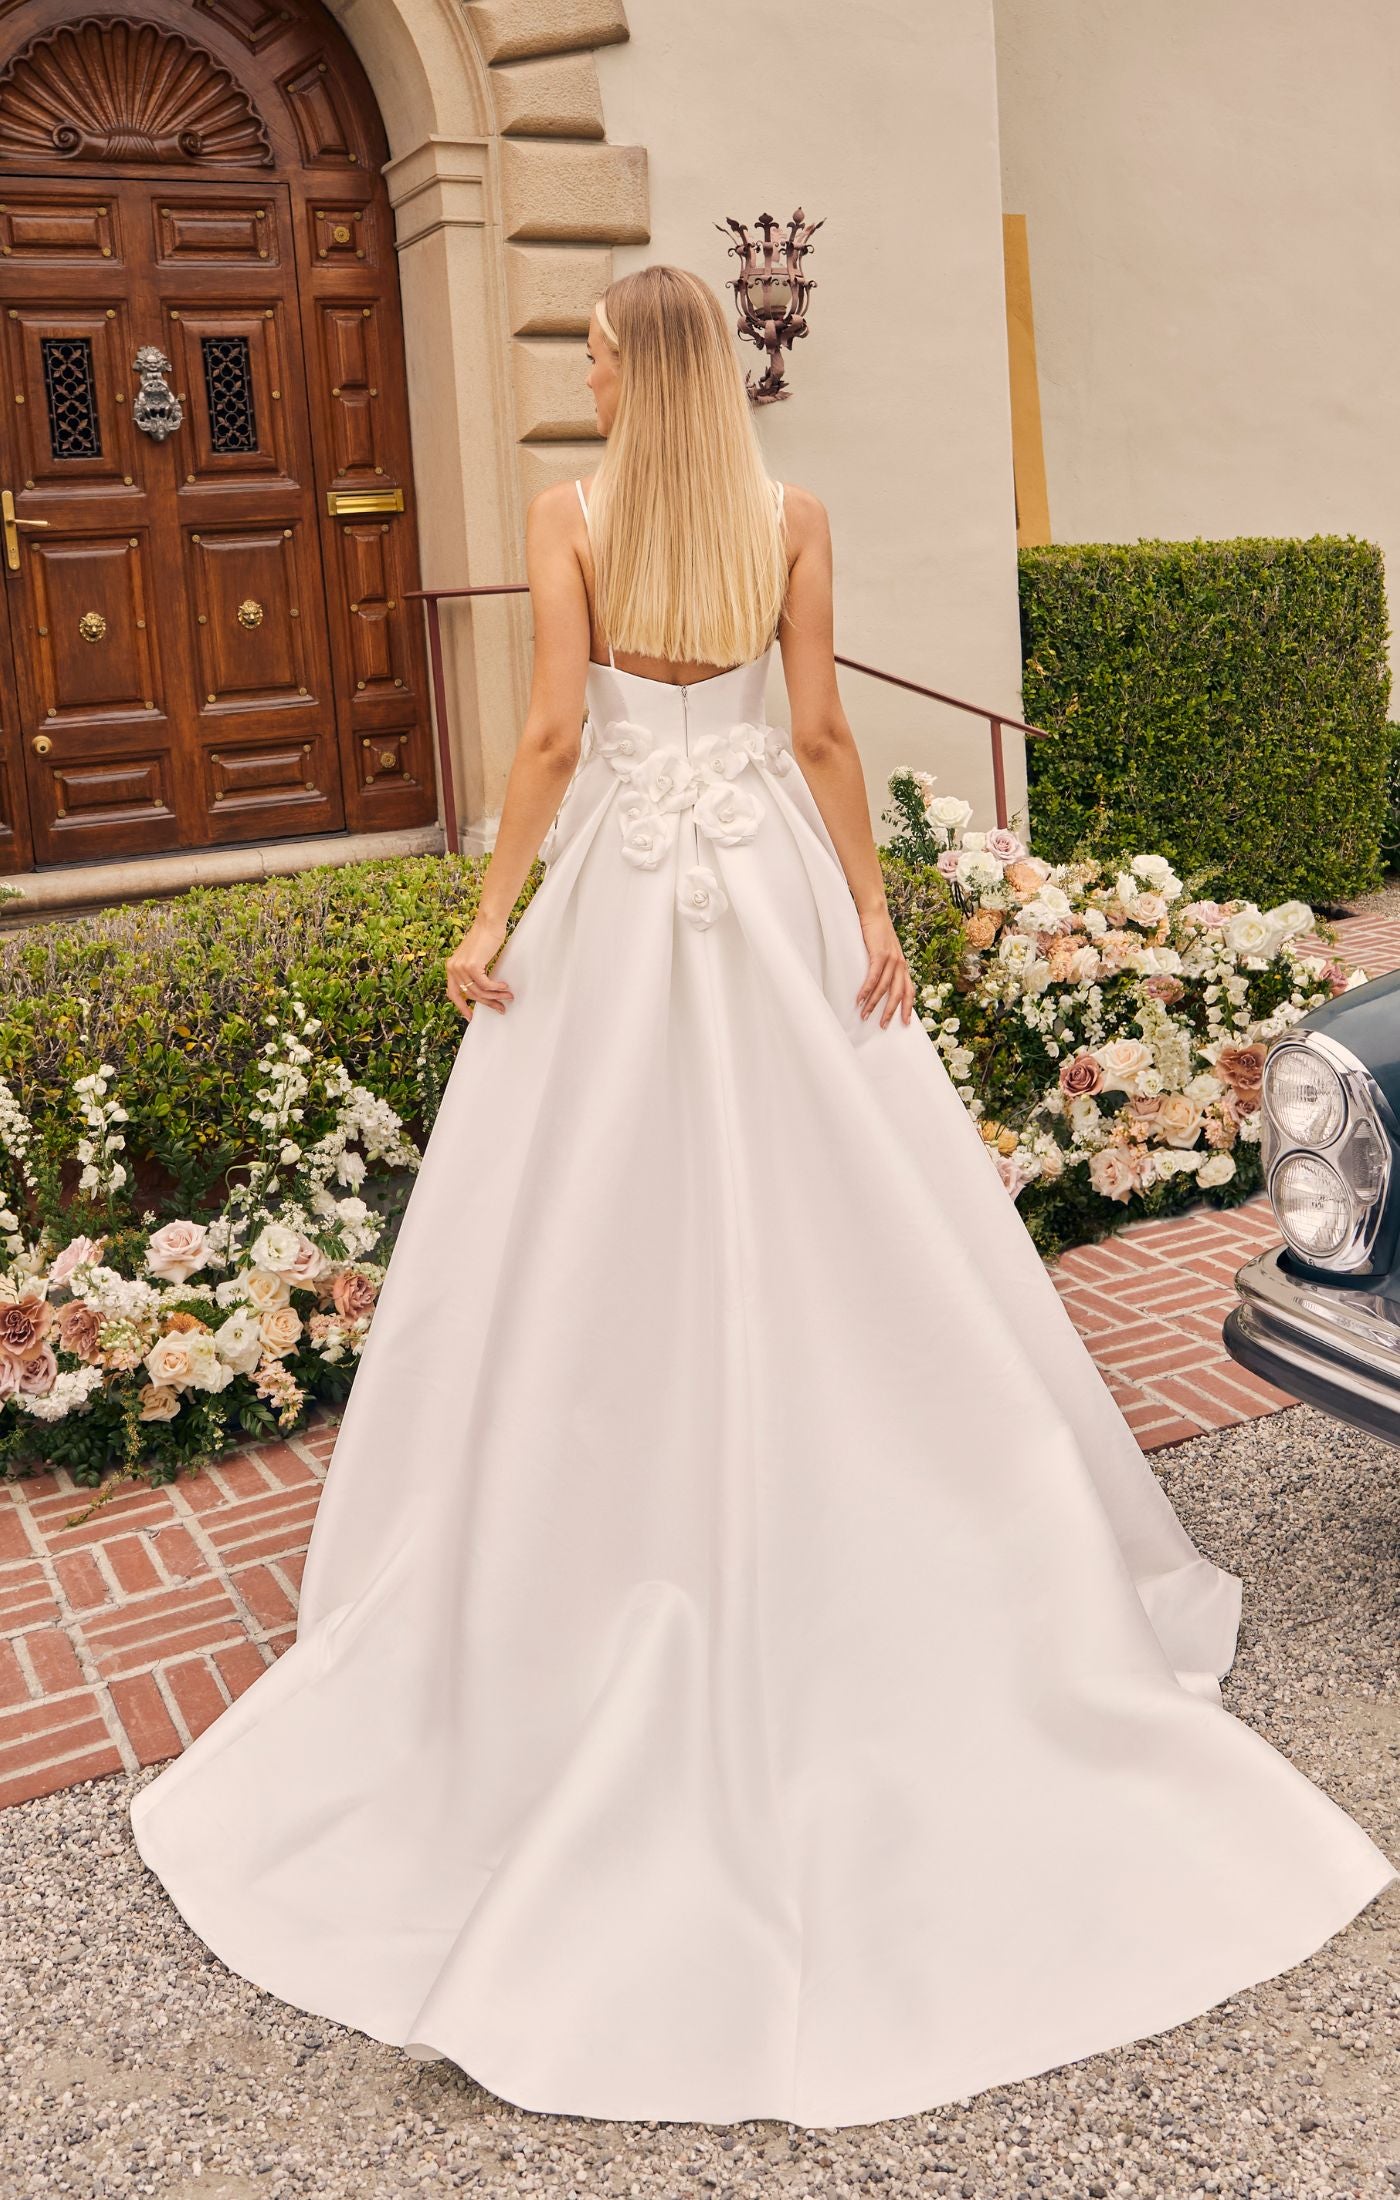 Casablanca Bridal 2556 A-Line Spaghetti Strap V-Neck Slit Train Wedding Gown. Prepare to be captivated by the sheer beauty of Style 2556 Bellisima, an exquisite A-line wedding dress that redefines effortless elegance. The spaghetti strap bodice of Bellisima features a flattering V-neckline, accentuating your décolletage and creating a delicate frame for your face.